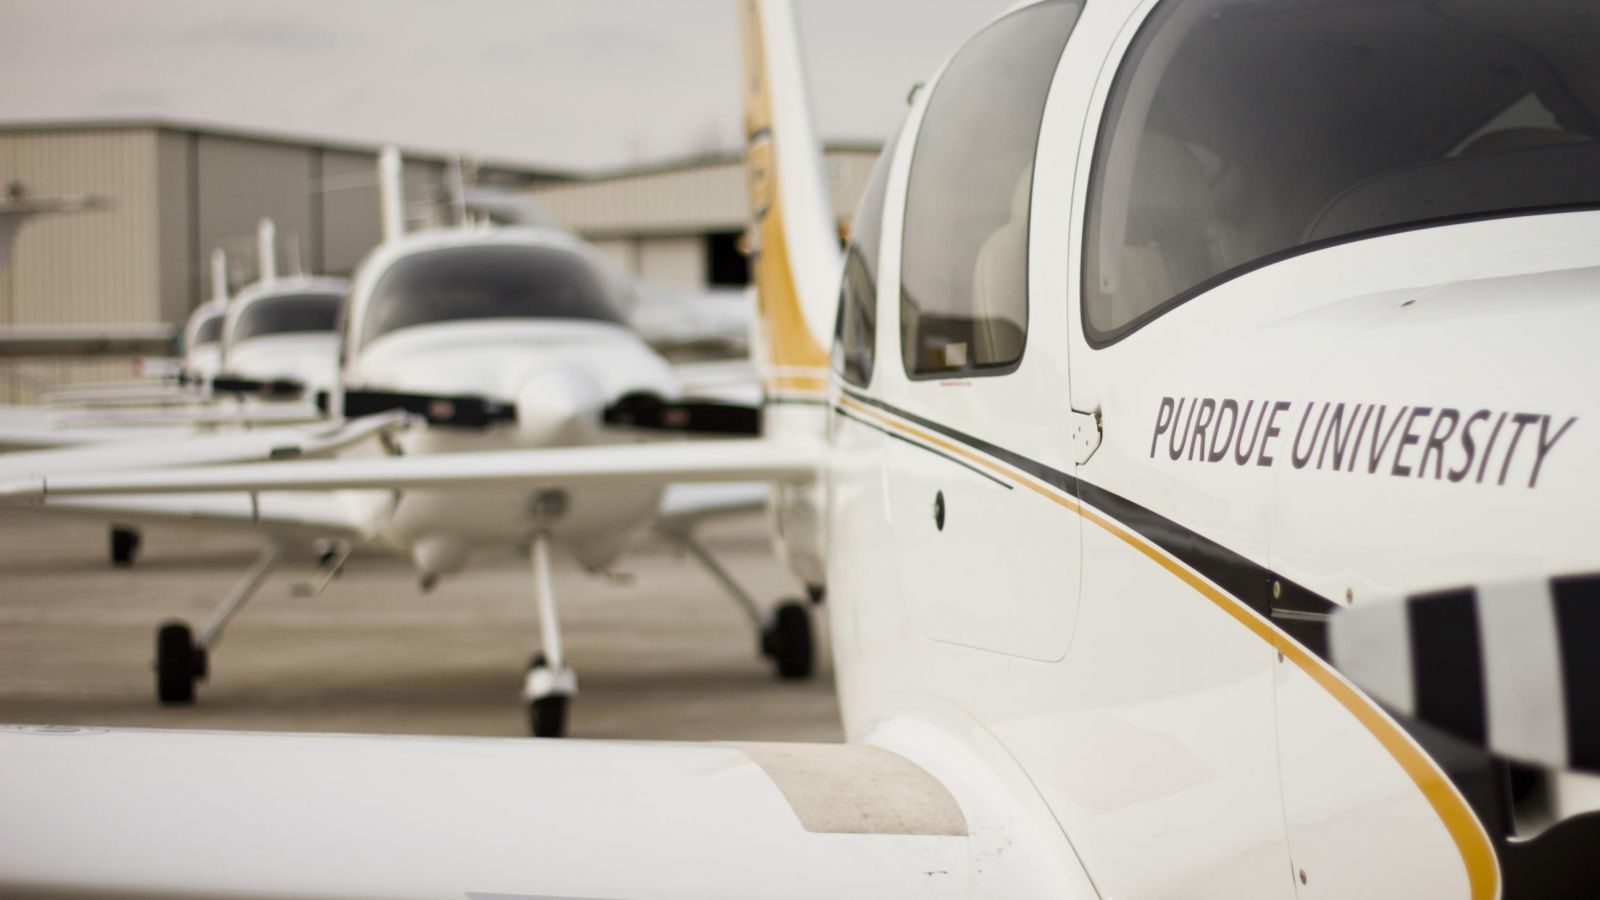 Small aircraft at the Purdue University Airport (File photo)